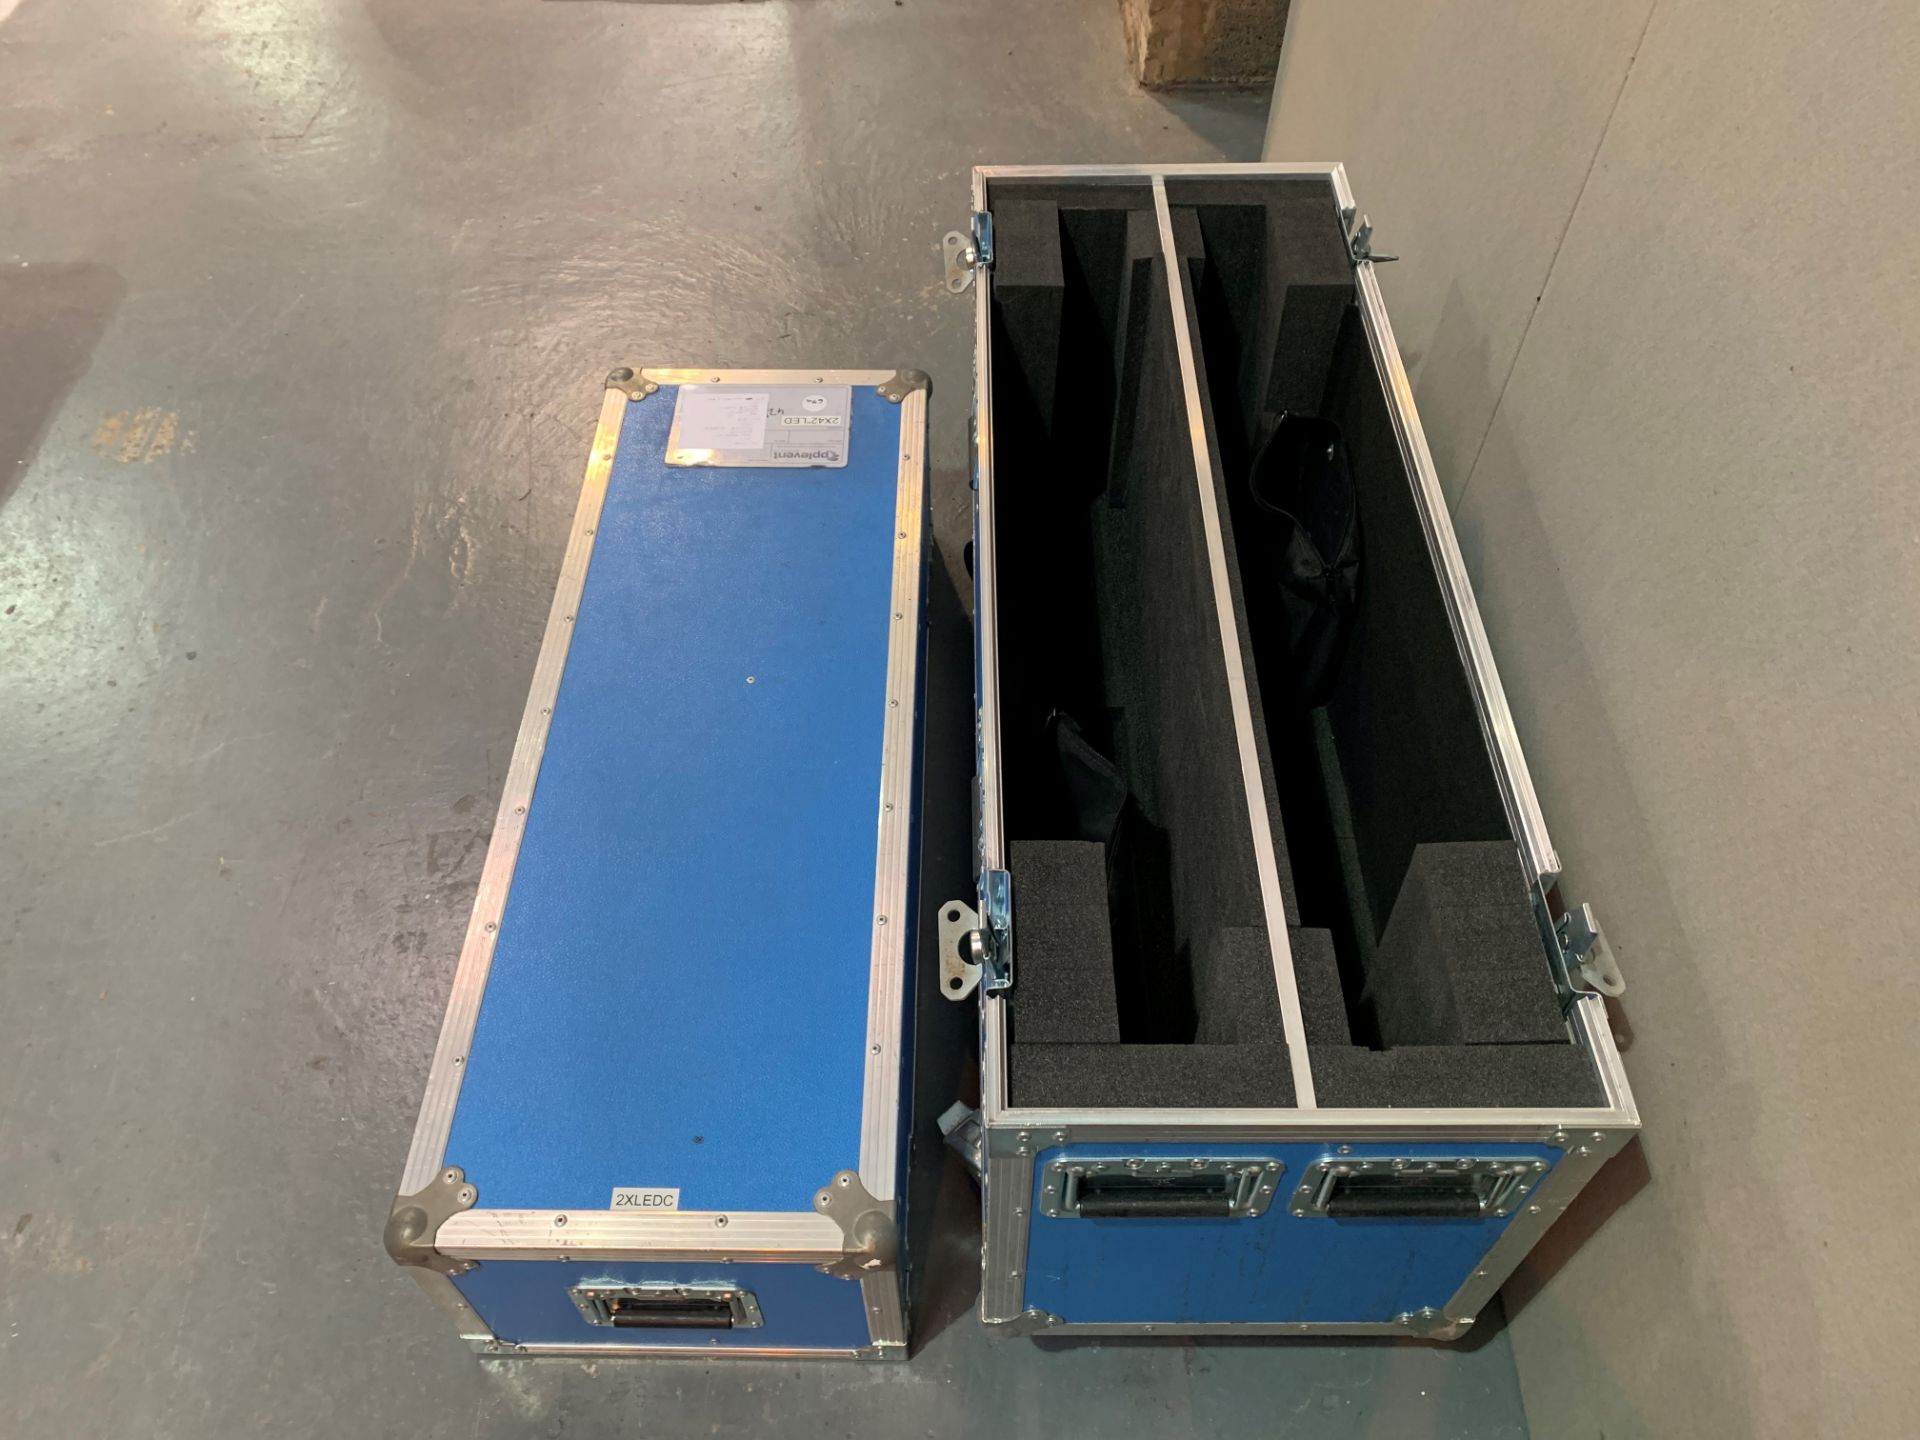 Double Flight case for Lots 68 & 69 - 1080 x 830 x 390mm - Image 2 of 2